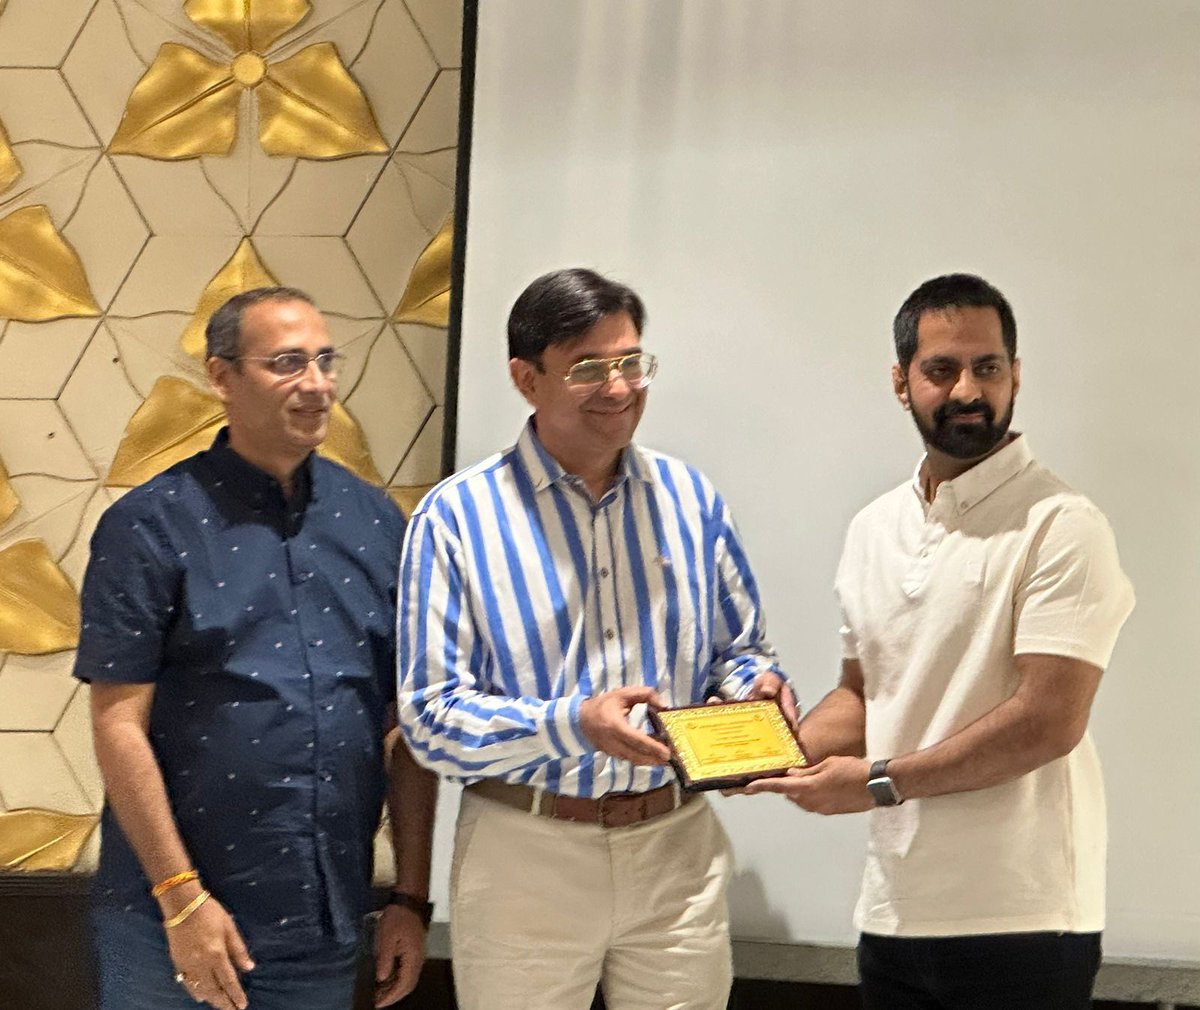 IMA South Delhi honours our Founder and Director, Dr Amit Harshana, for his exemplary dedication to healthcare excellence. Together, we strive for a healthier tomorrow.
.
.
#IMARecognition #MedicalLeadership #SouthDelhiIMA #AkesoHealth